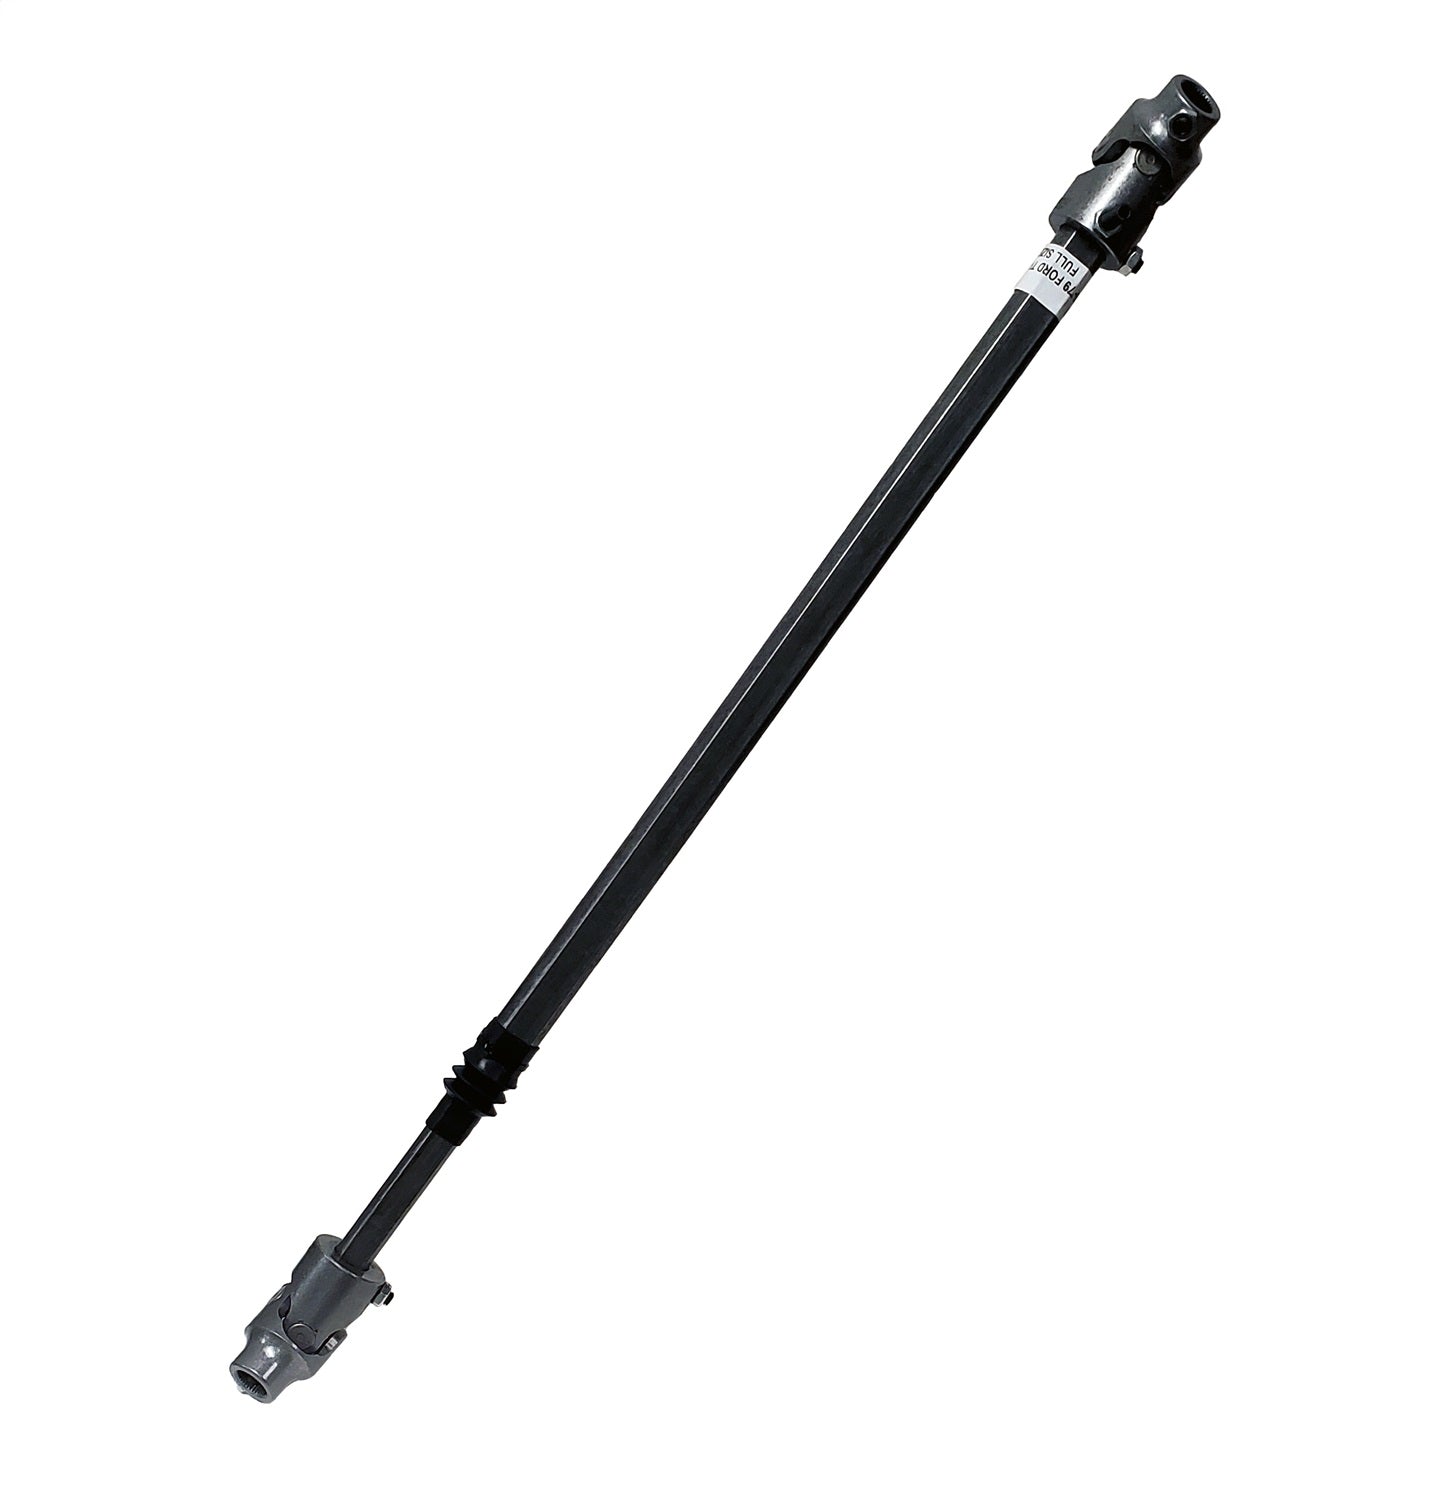 Borgeson 000970 Steering Shaft Assembly Fits 70-79 F-100 F-150 F-250 F-350